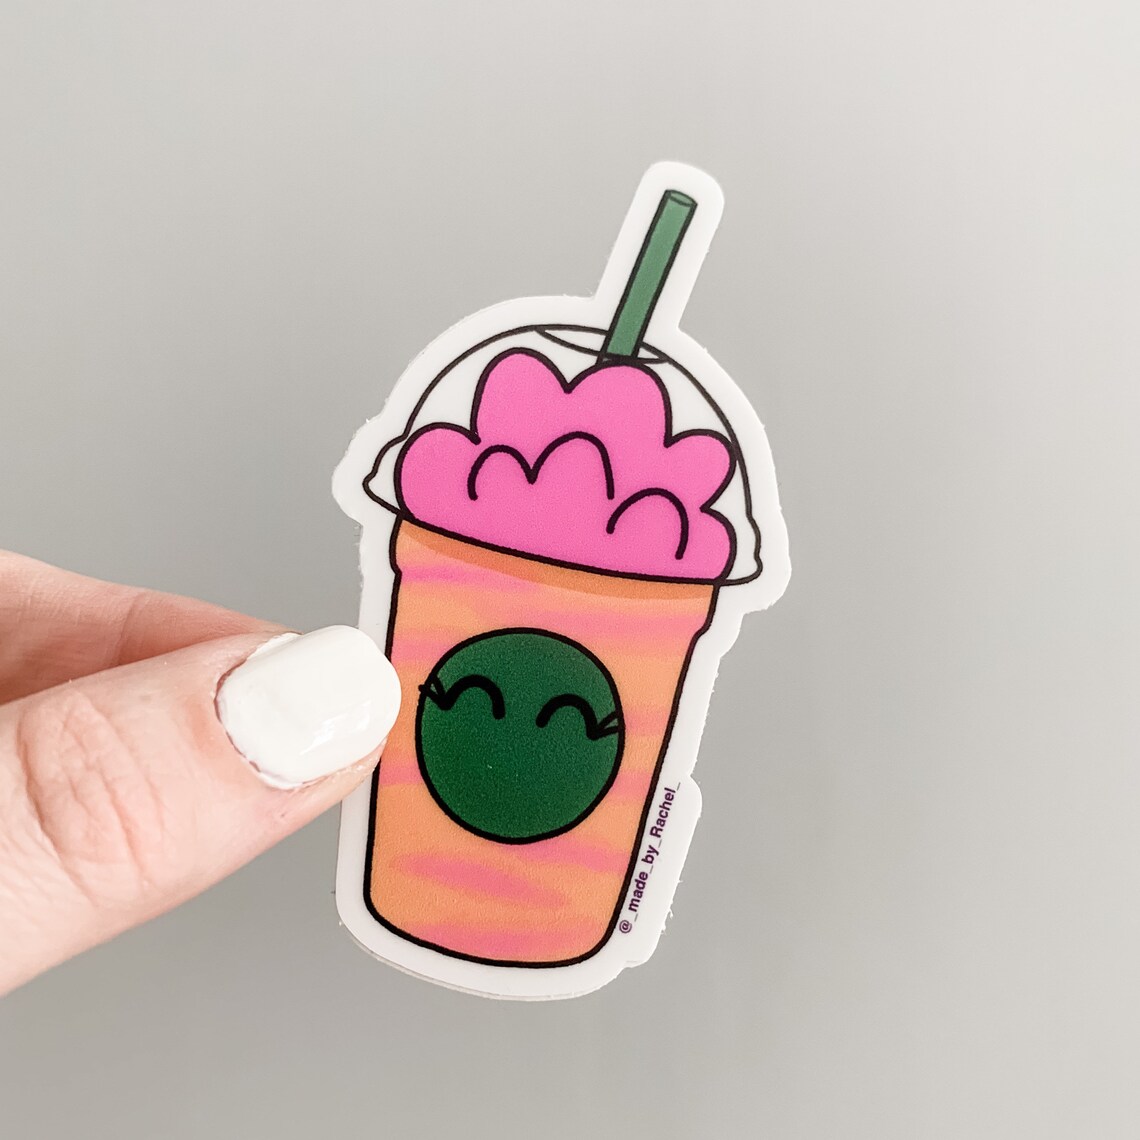 Kawaii boba sticker // hydro flask stickers for kids water | Etsy